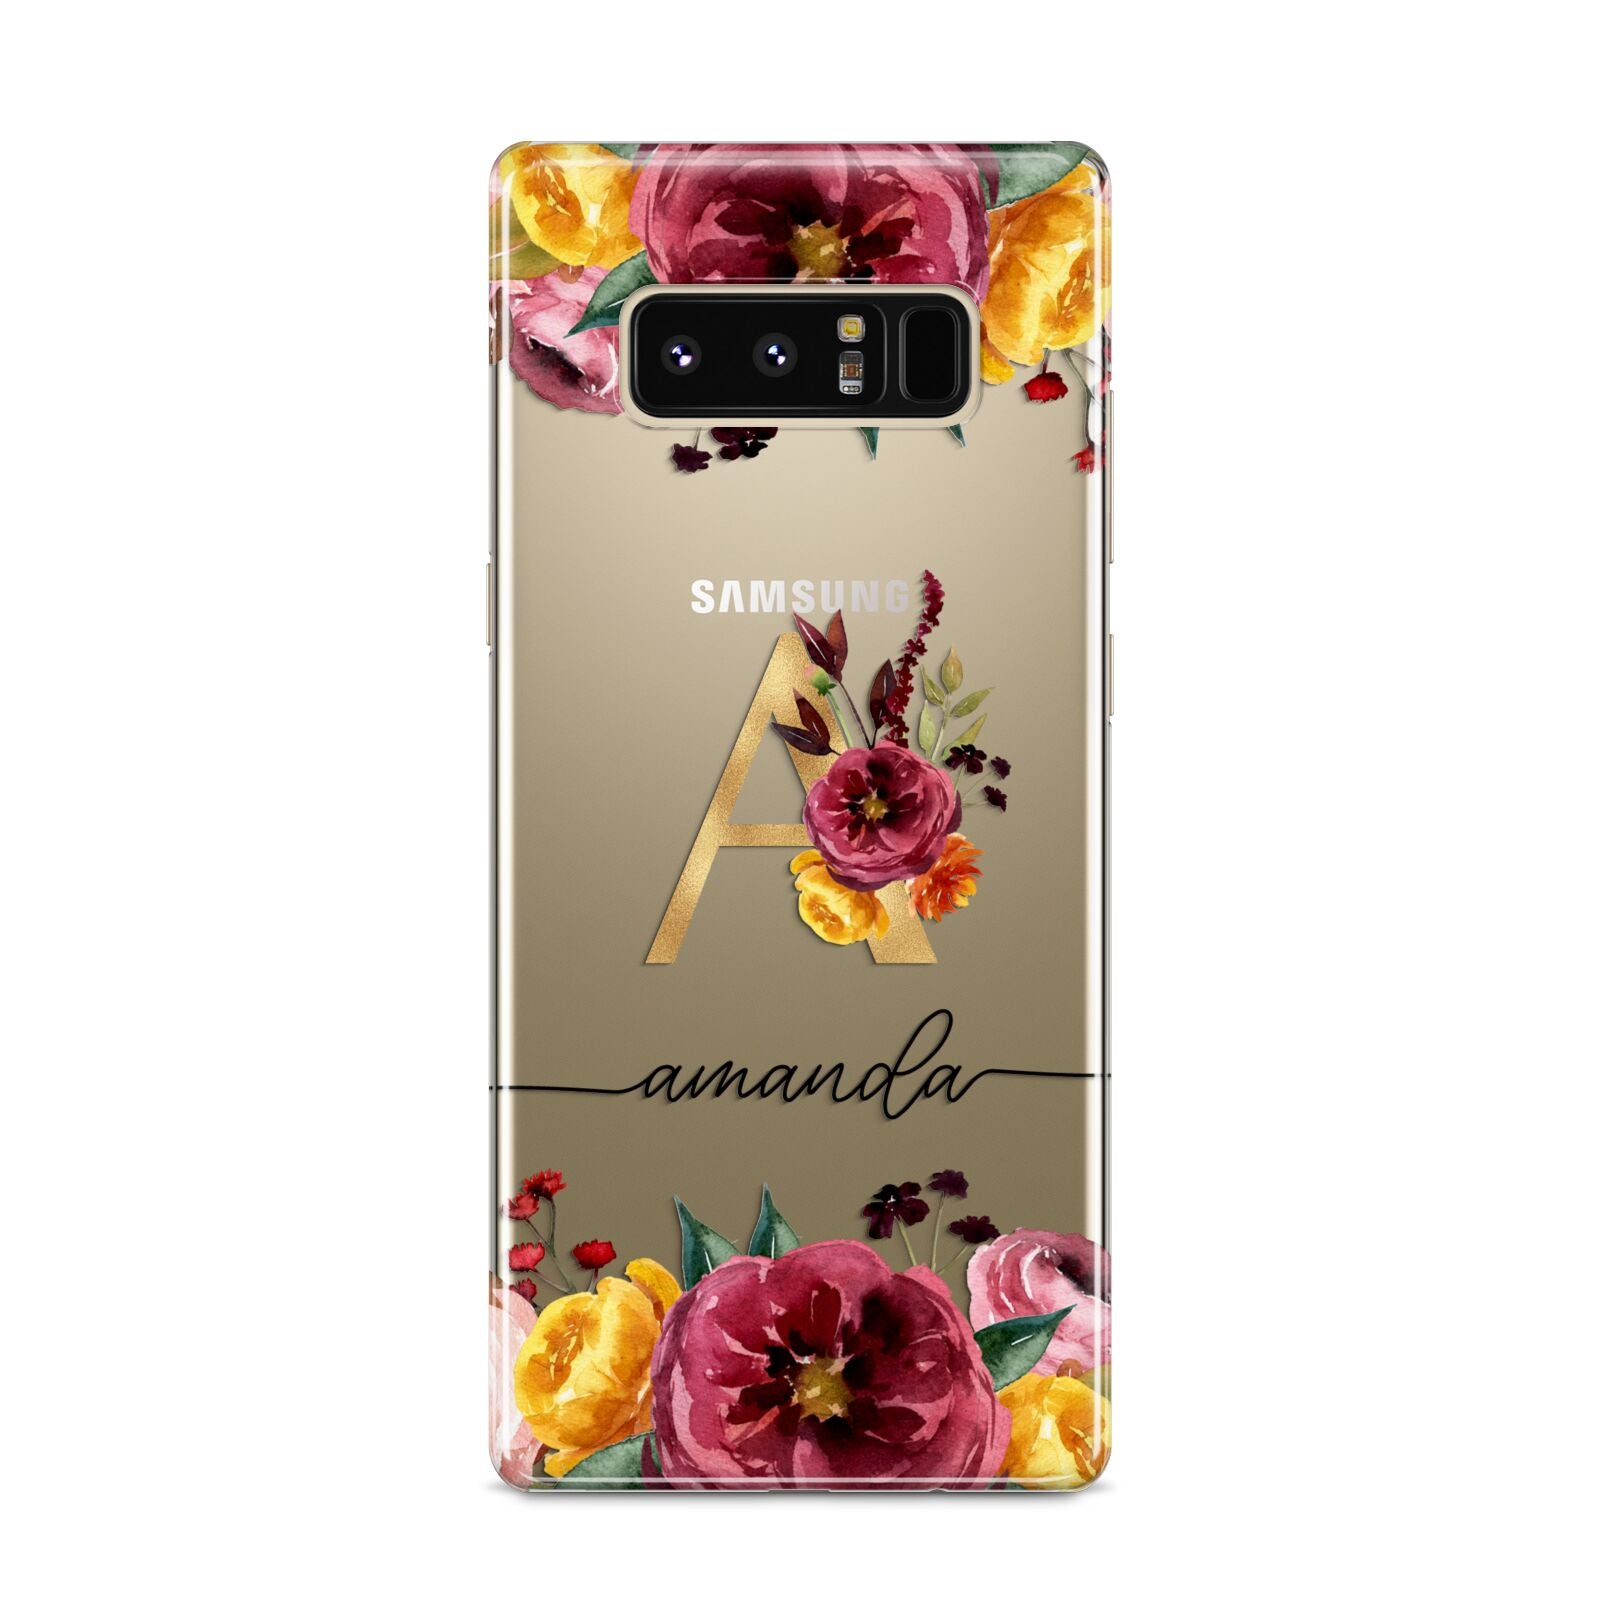 Autumn Watercolour Flowers with Initial Samsung Galaxy S8 Case